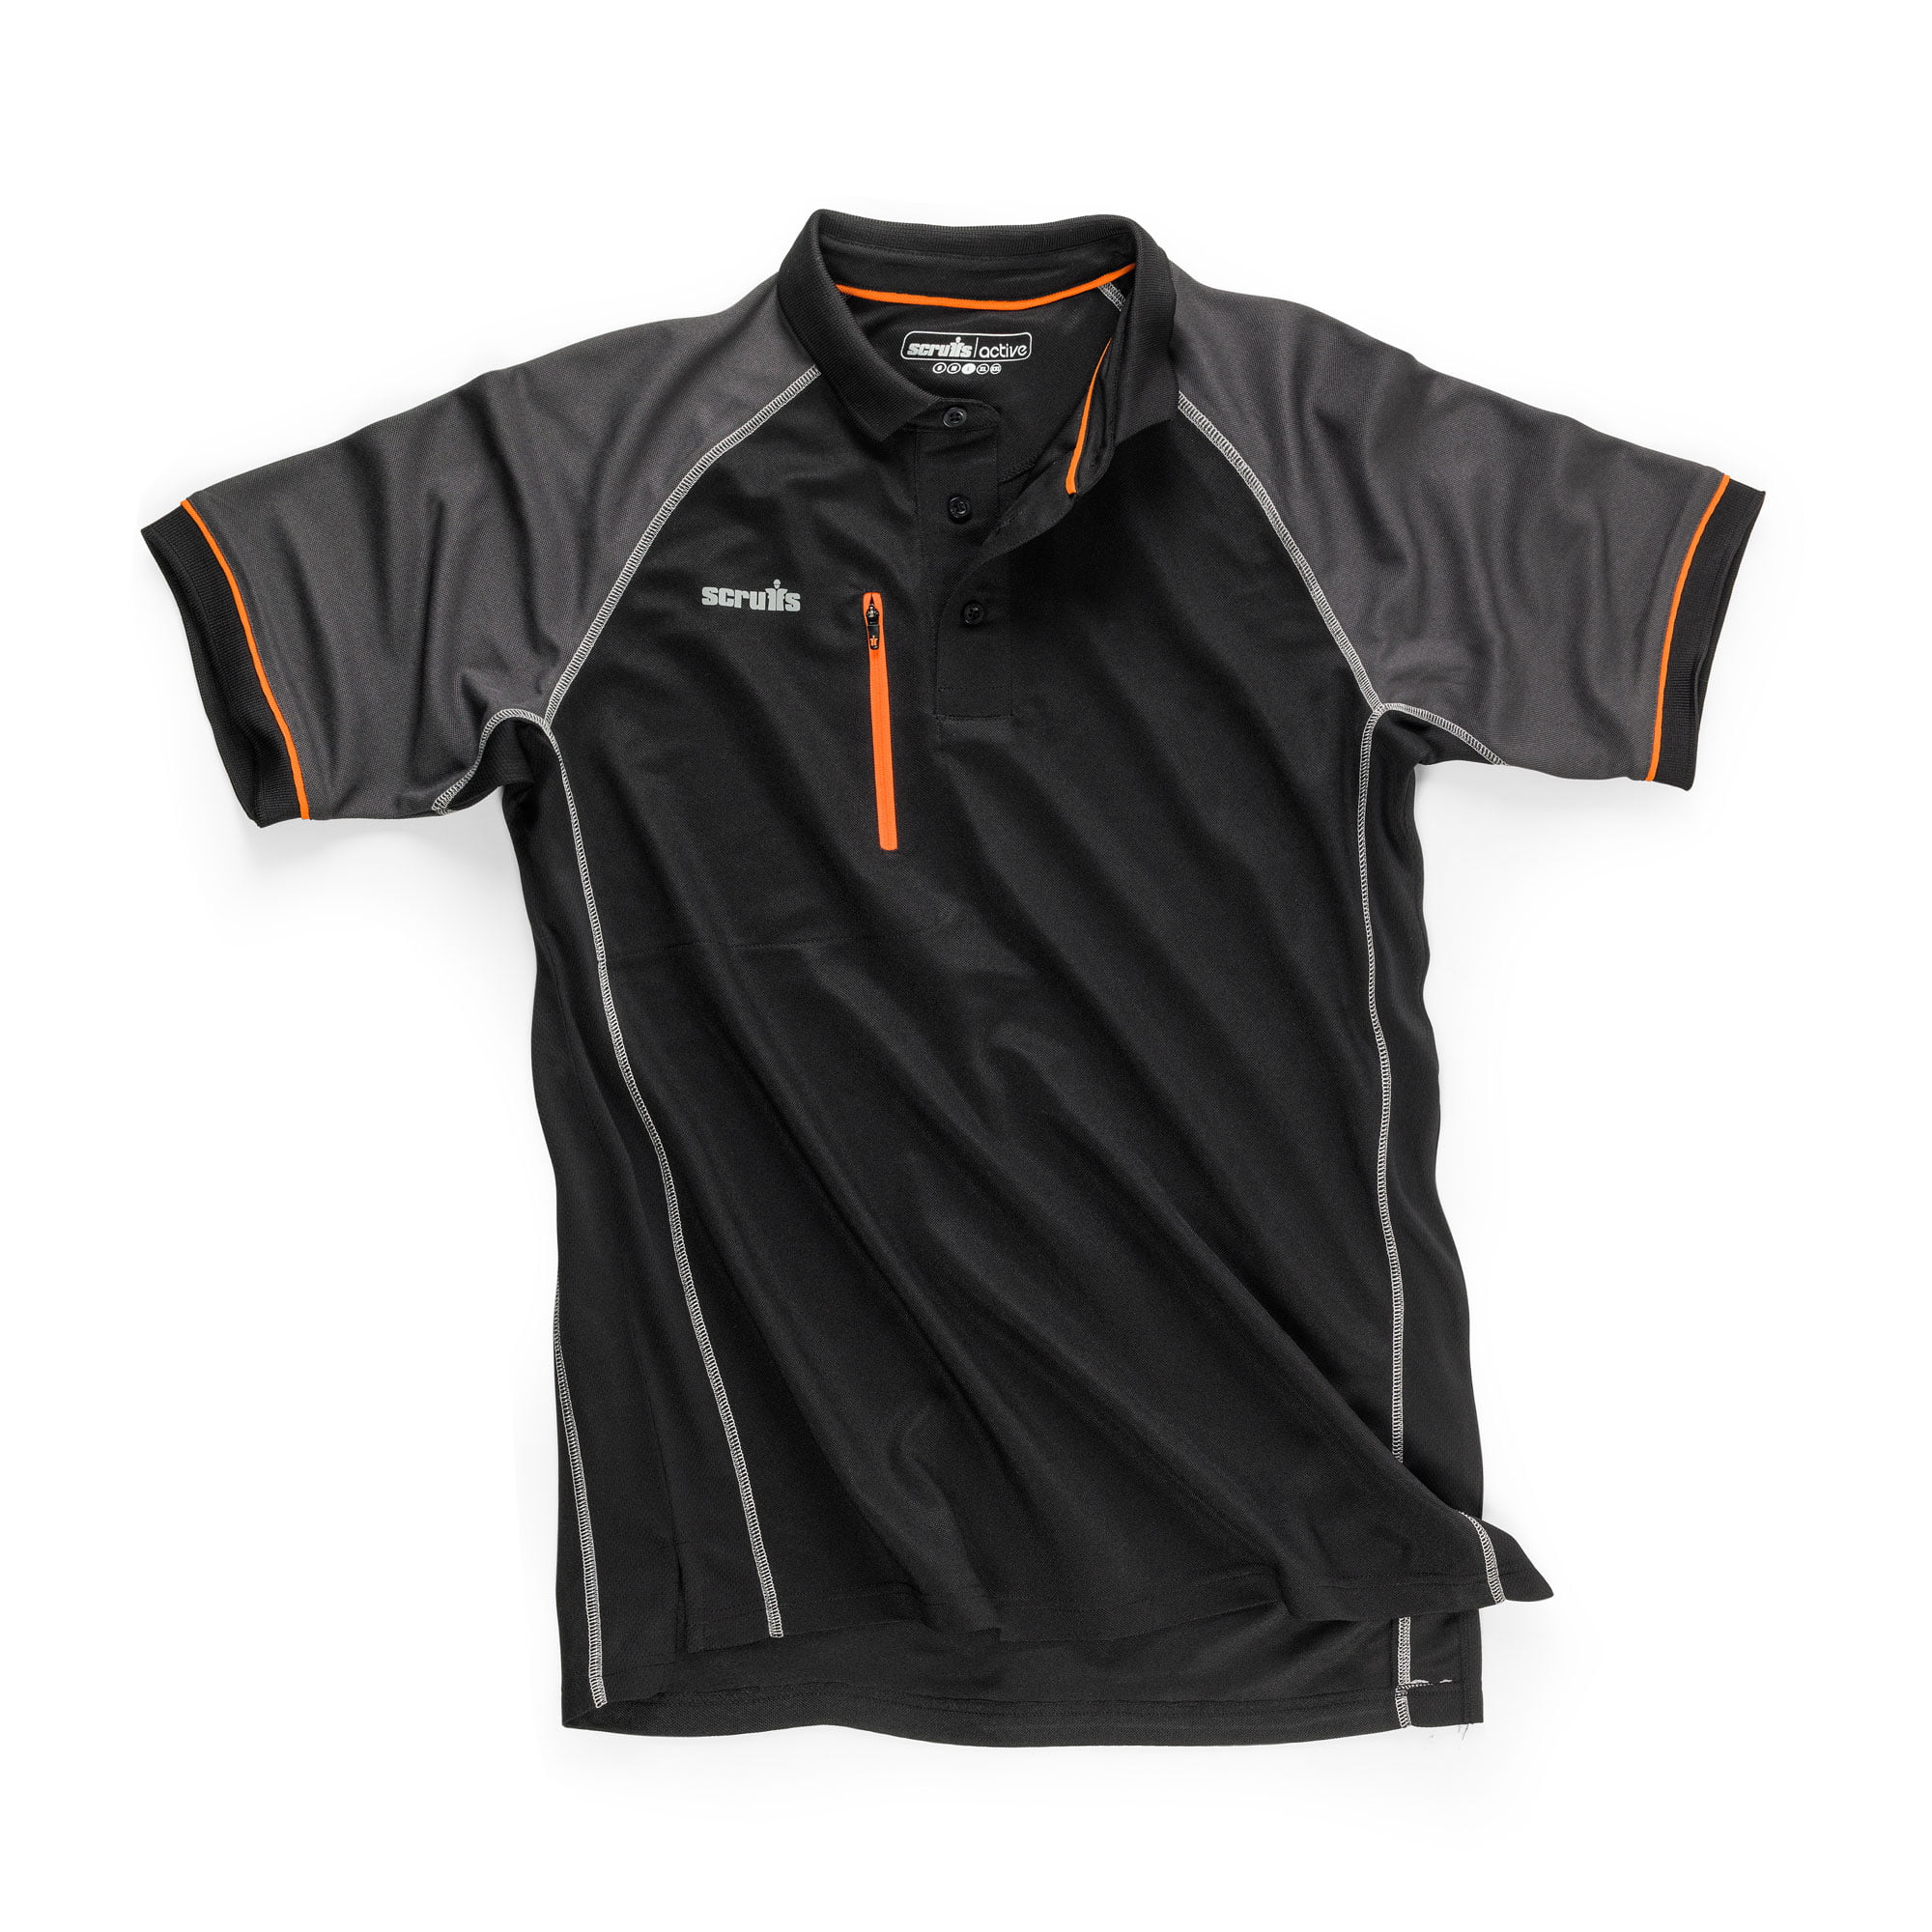 Scruffs Black and grey polo with orange detail